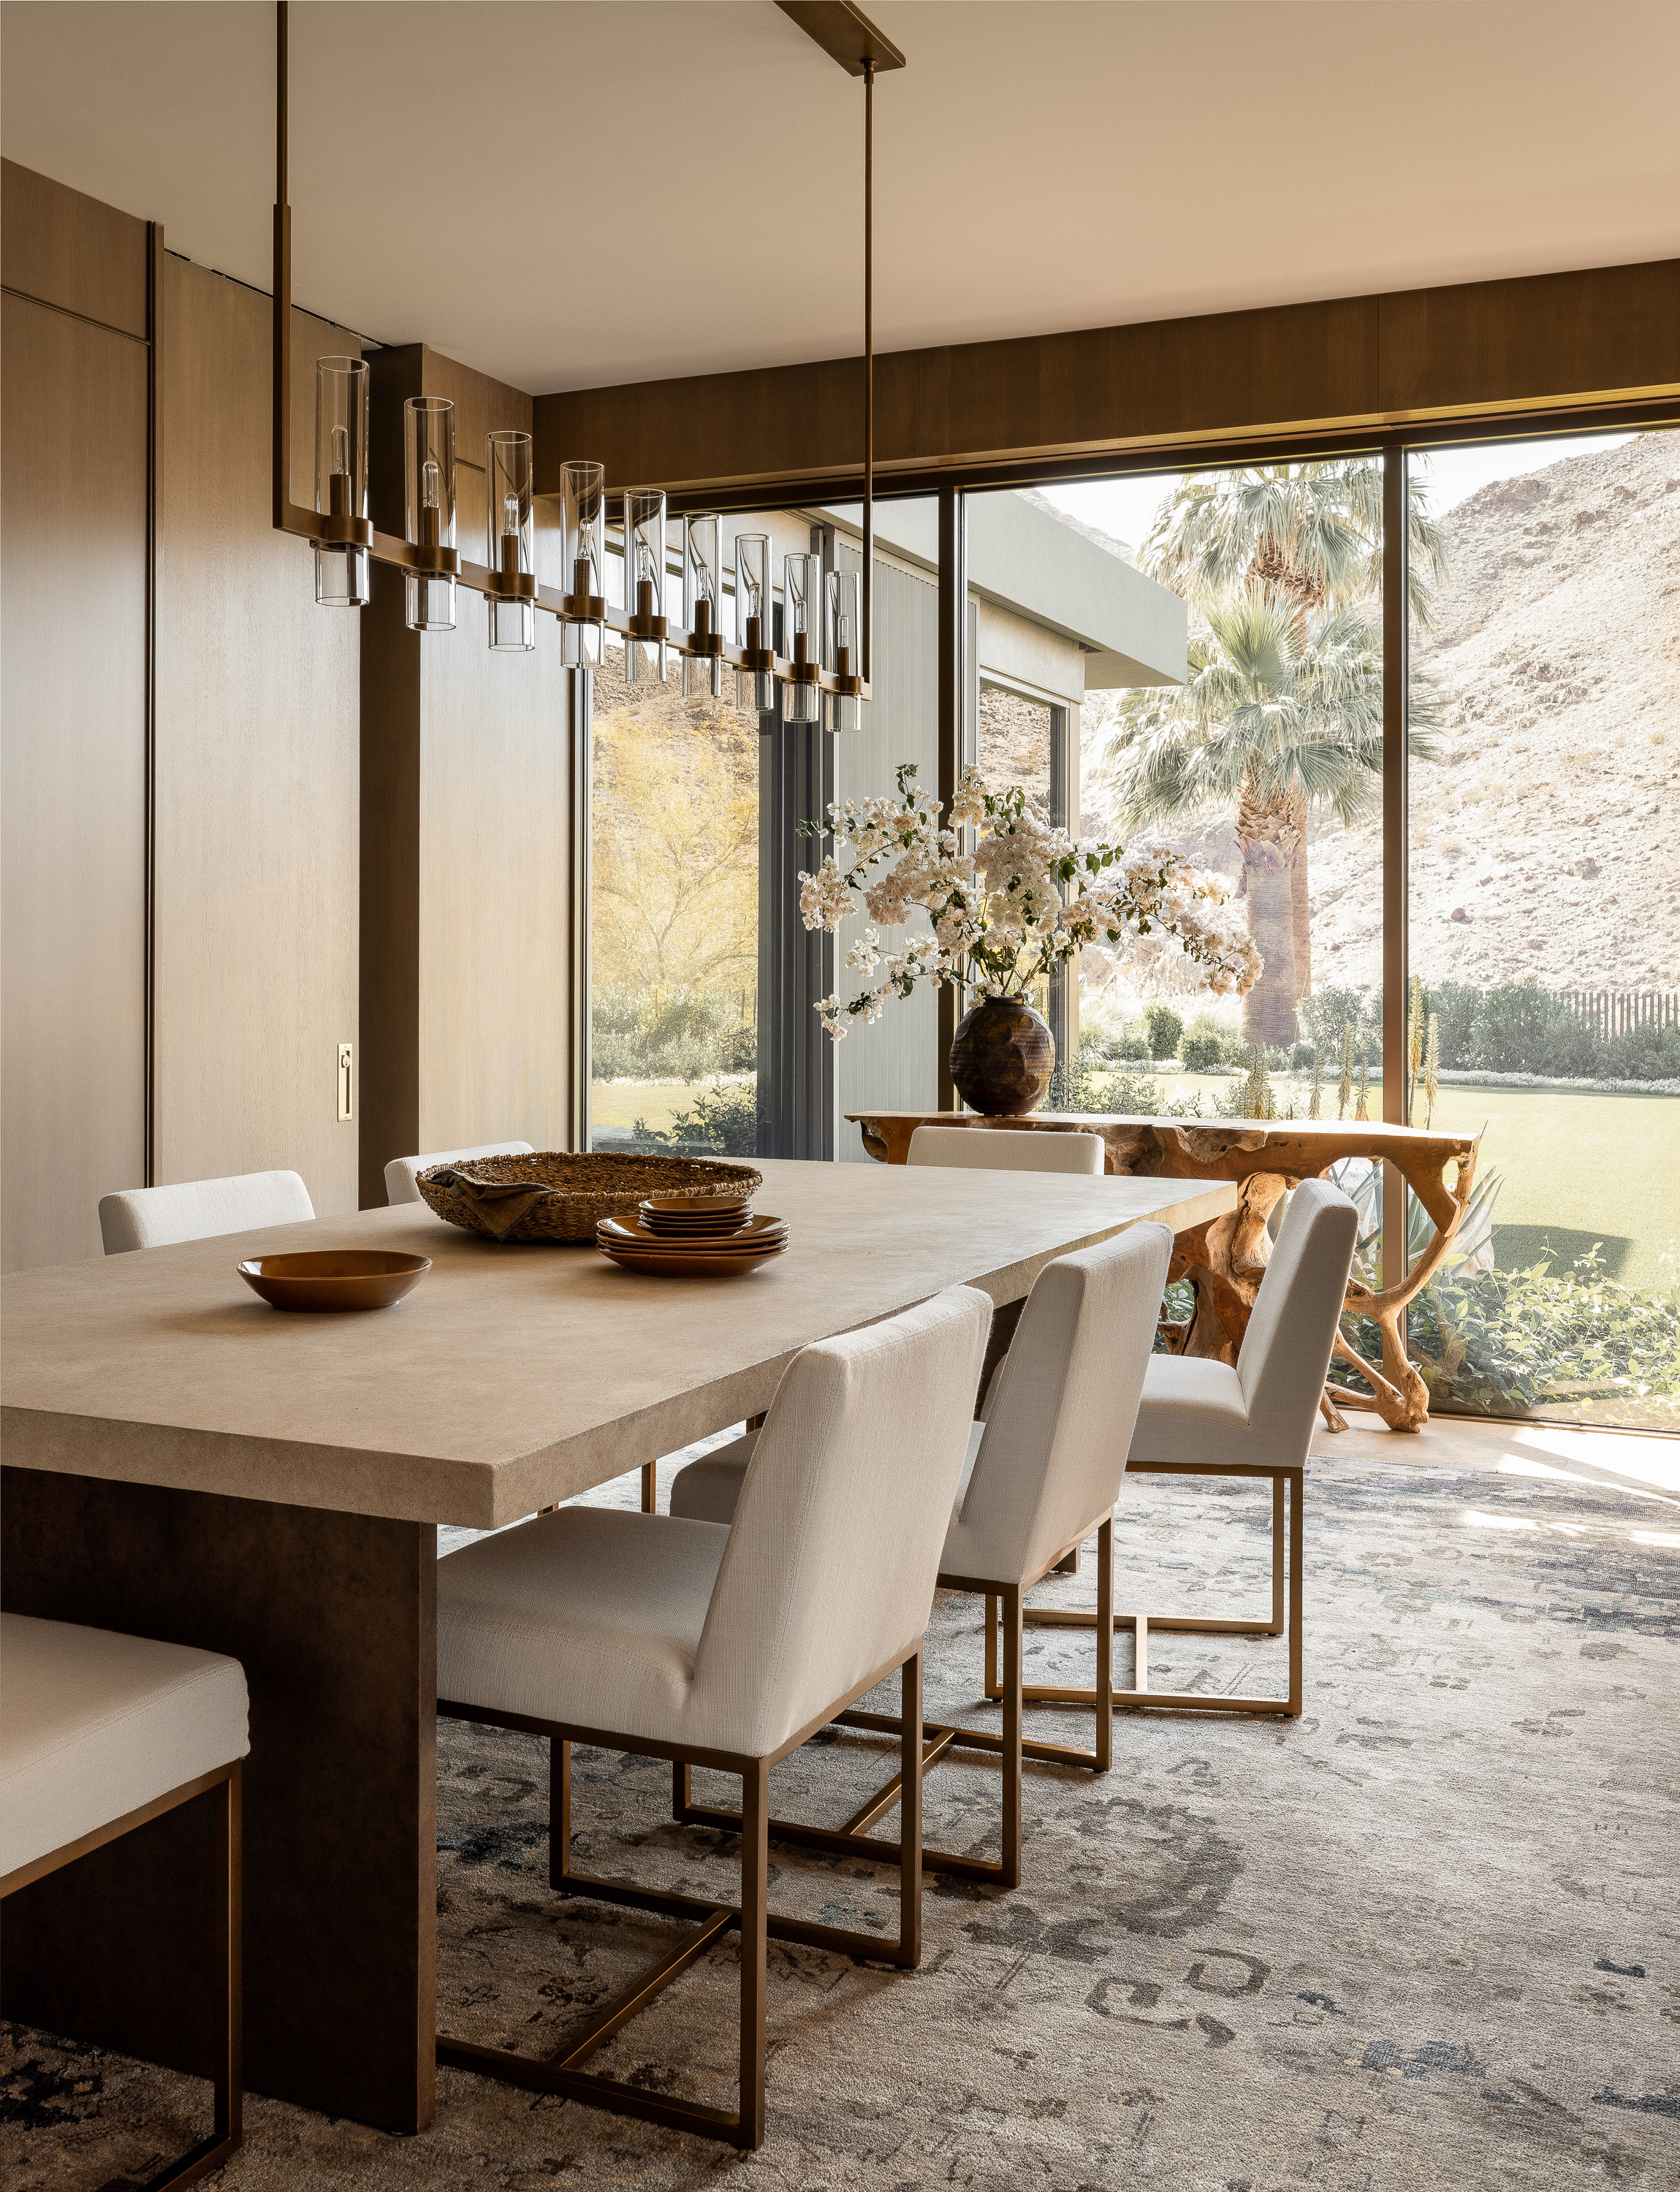 Dining room at Palm Springs Retreat: Oak and brass paneled walls, with views into the guest wing, offer an intimate dining experience in a modern desert setting.